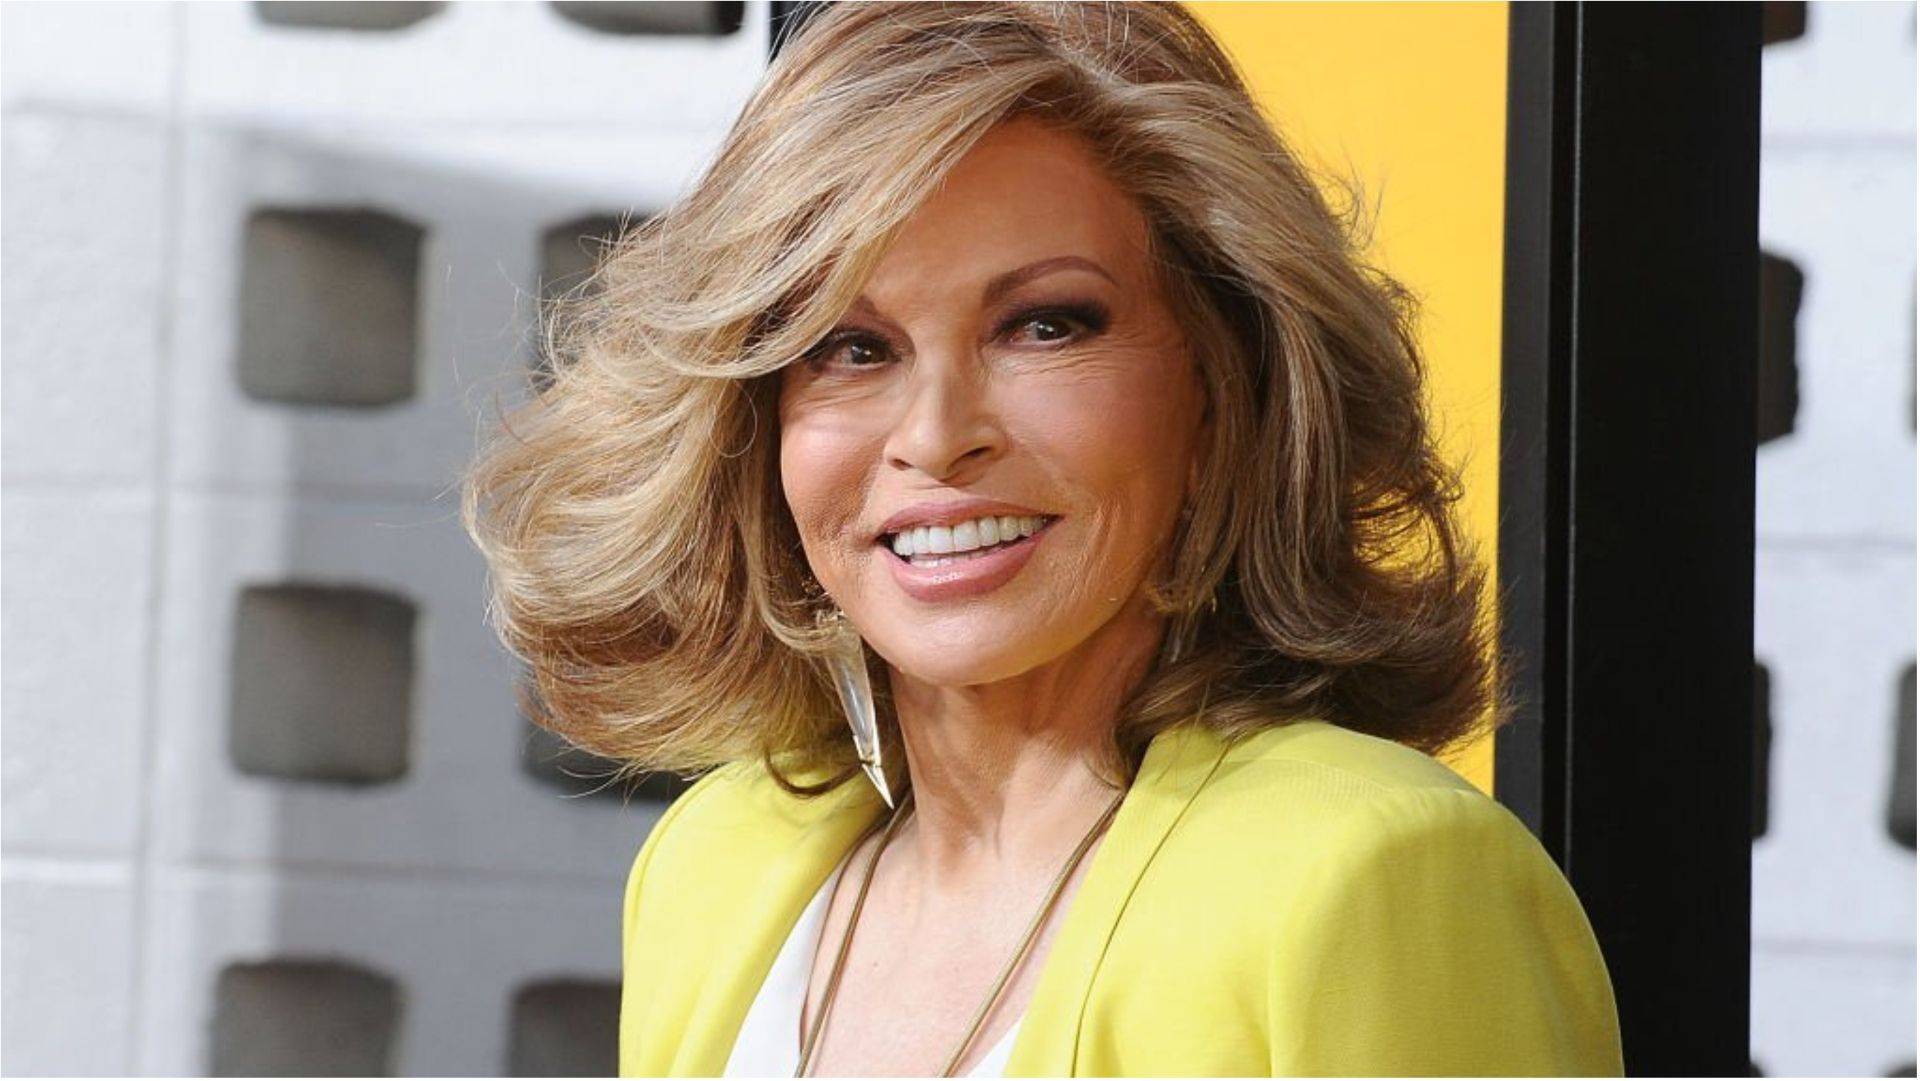 raquel welch daughter,raquel welch cause of death,raquel welch children,raquel welch wiki,raquel welch lives where,raquel welch house,raquel welch husband,what does raquel welch look like today,raquel welch no makeup,raquel welch net worth,raquel welch net worth 2018,raquel welch net worth 2021,raquel welch net worth 2022,raquel welch net worth 2020,welch net worth raquel welch now 2020,raquel welch age and net worth,actress raquel welch net worth,net worth raquel welch